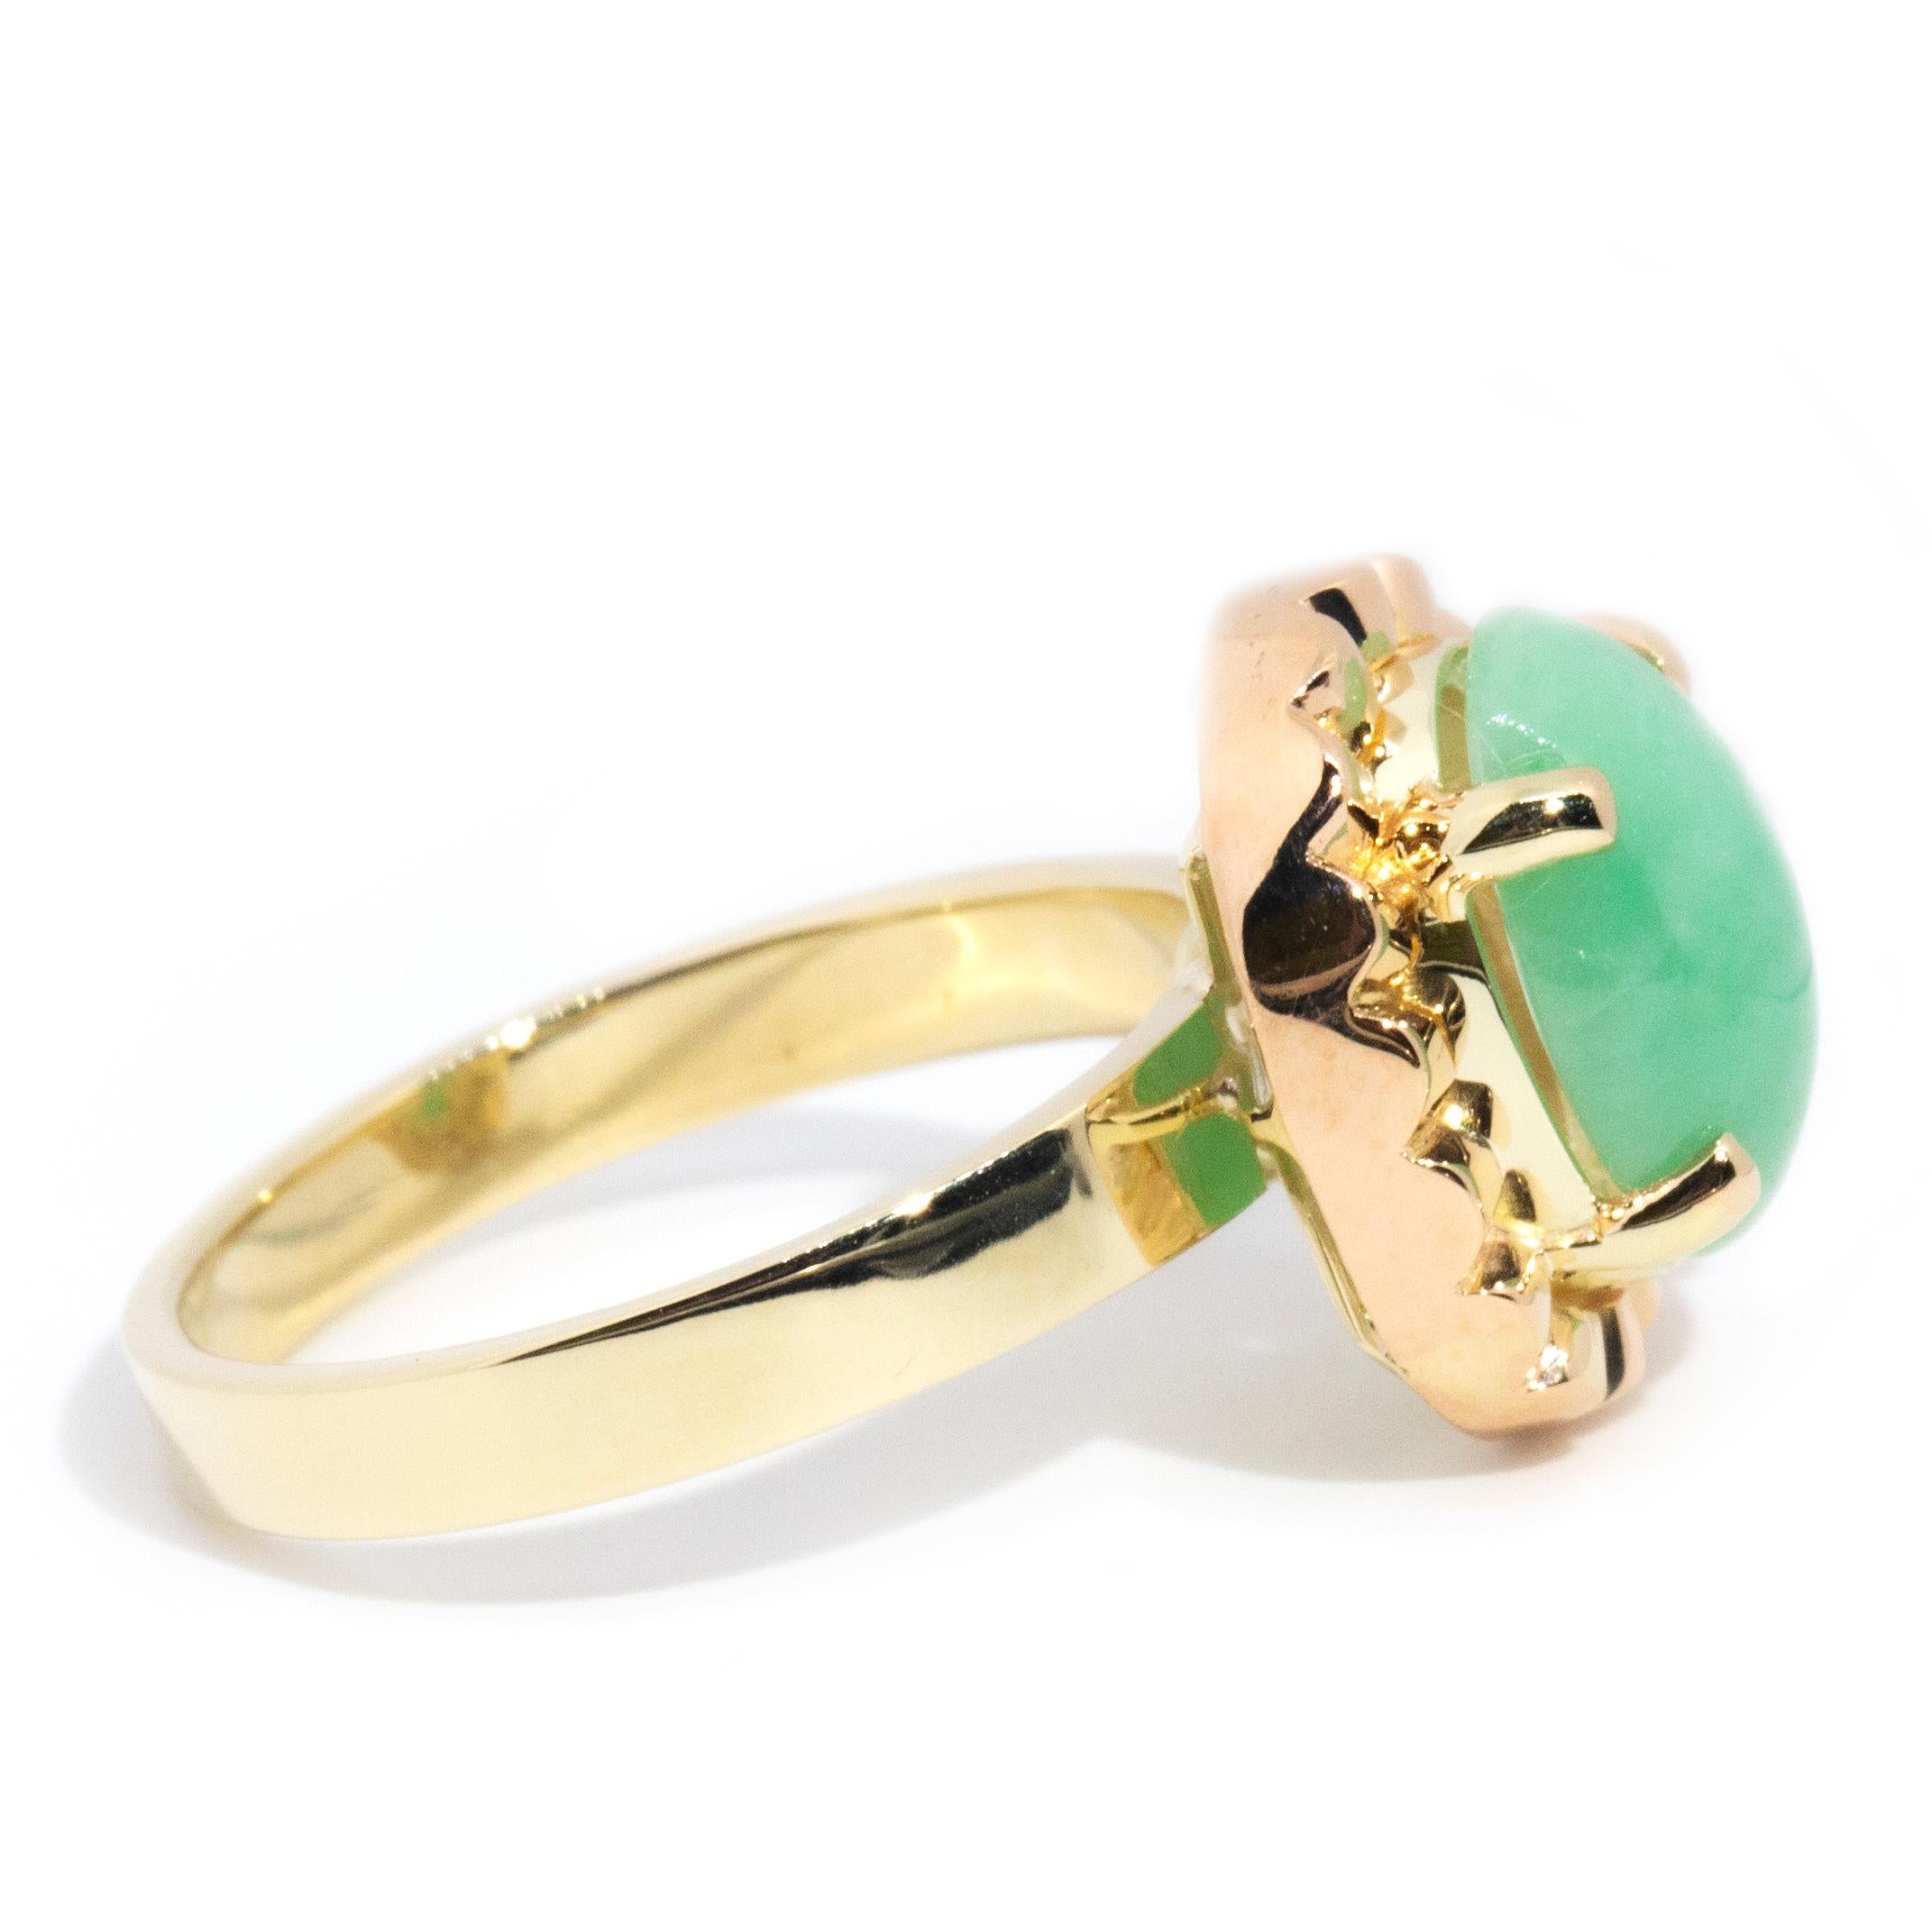 Vintage circa 1970s 14 Carat Yellow Gold Light Green Cabochon Cut Jade Ring In Good Condition For Sale In Hamilton, AU